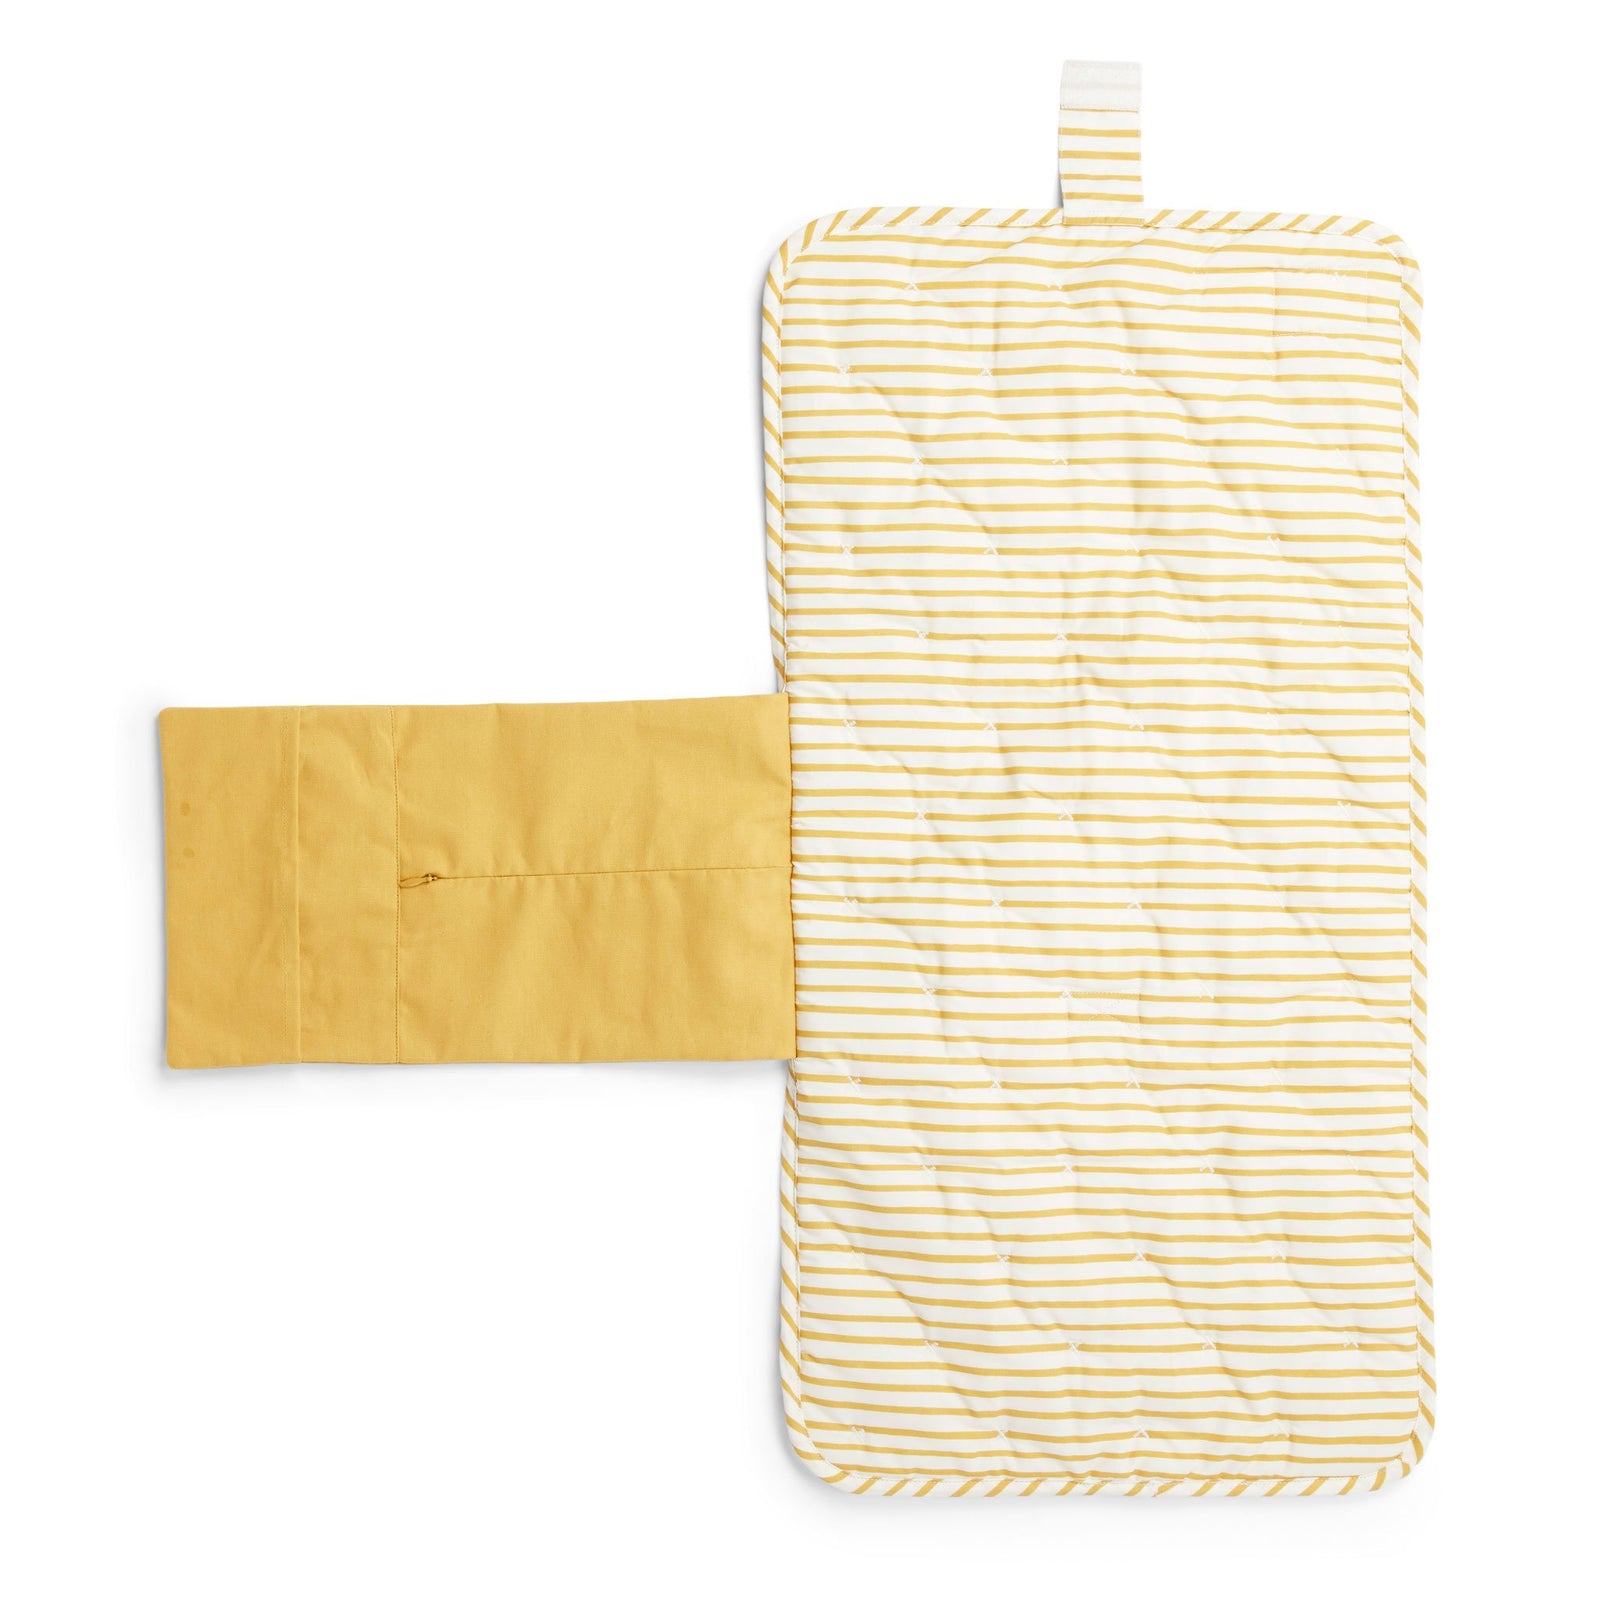 Pehr Marigold Organic On The Go Travel Change Pad opened up. GOTS Certified Organic Cotton & Dyes. White with gold stripes.